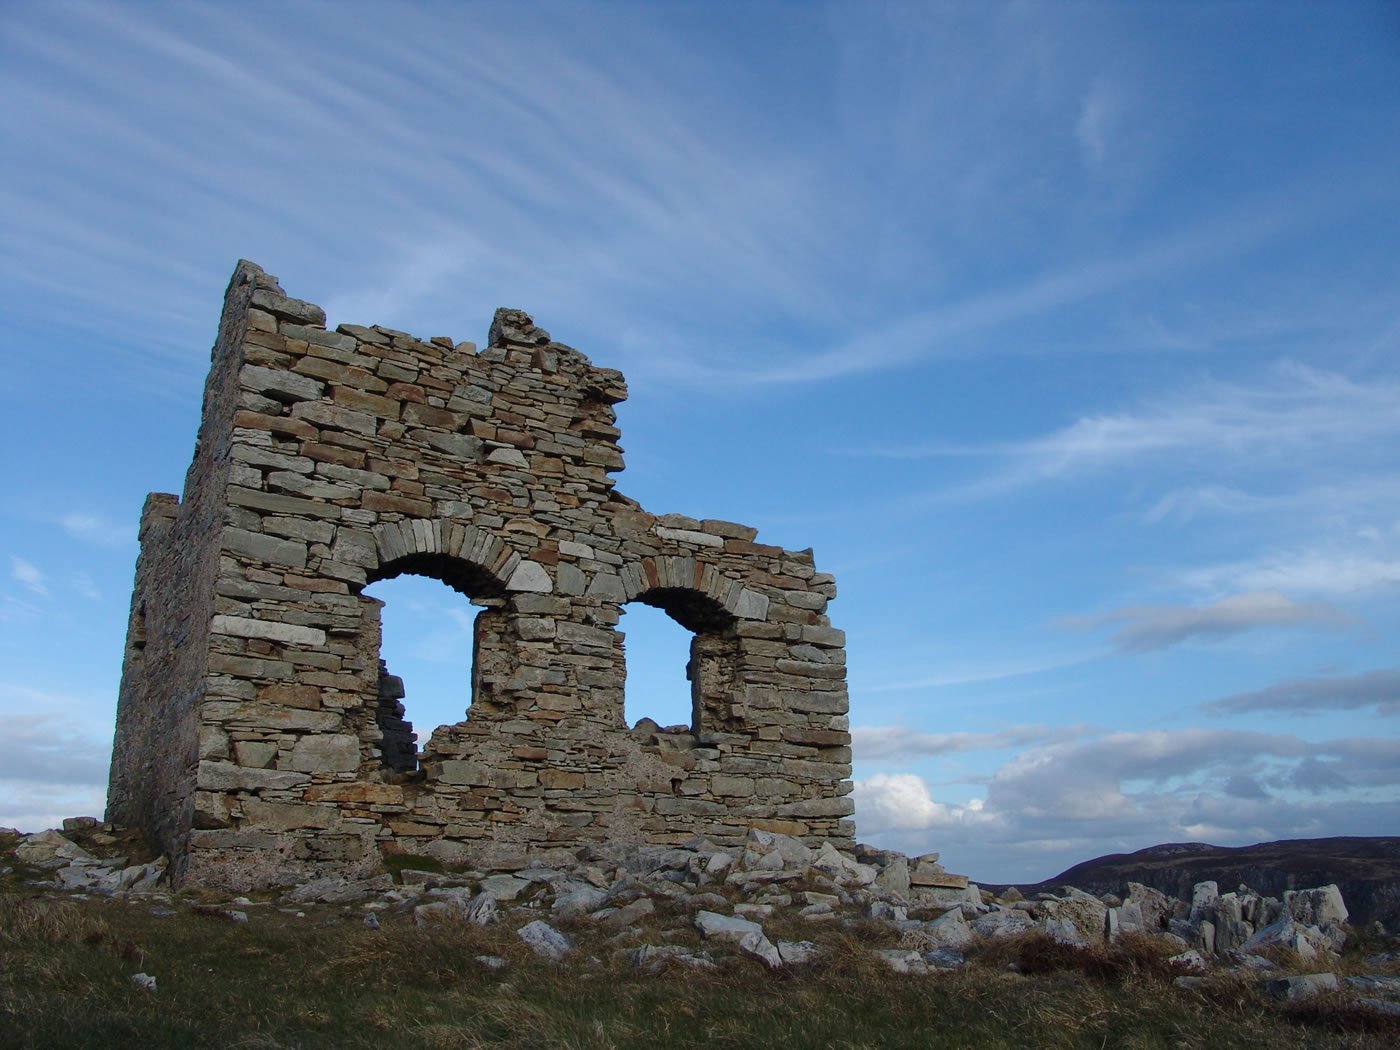 a rocky structure with an arched window in the side of it